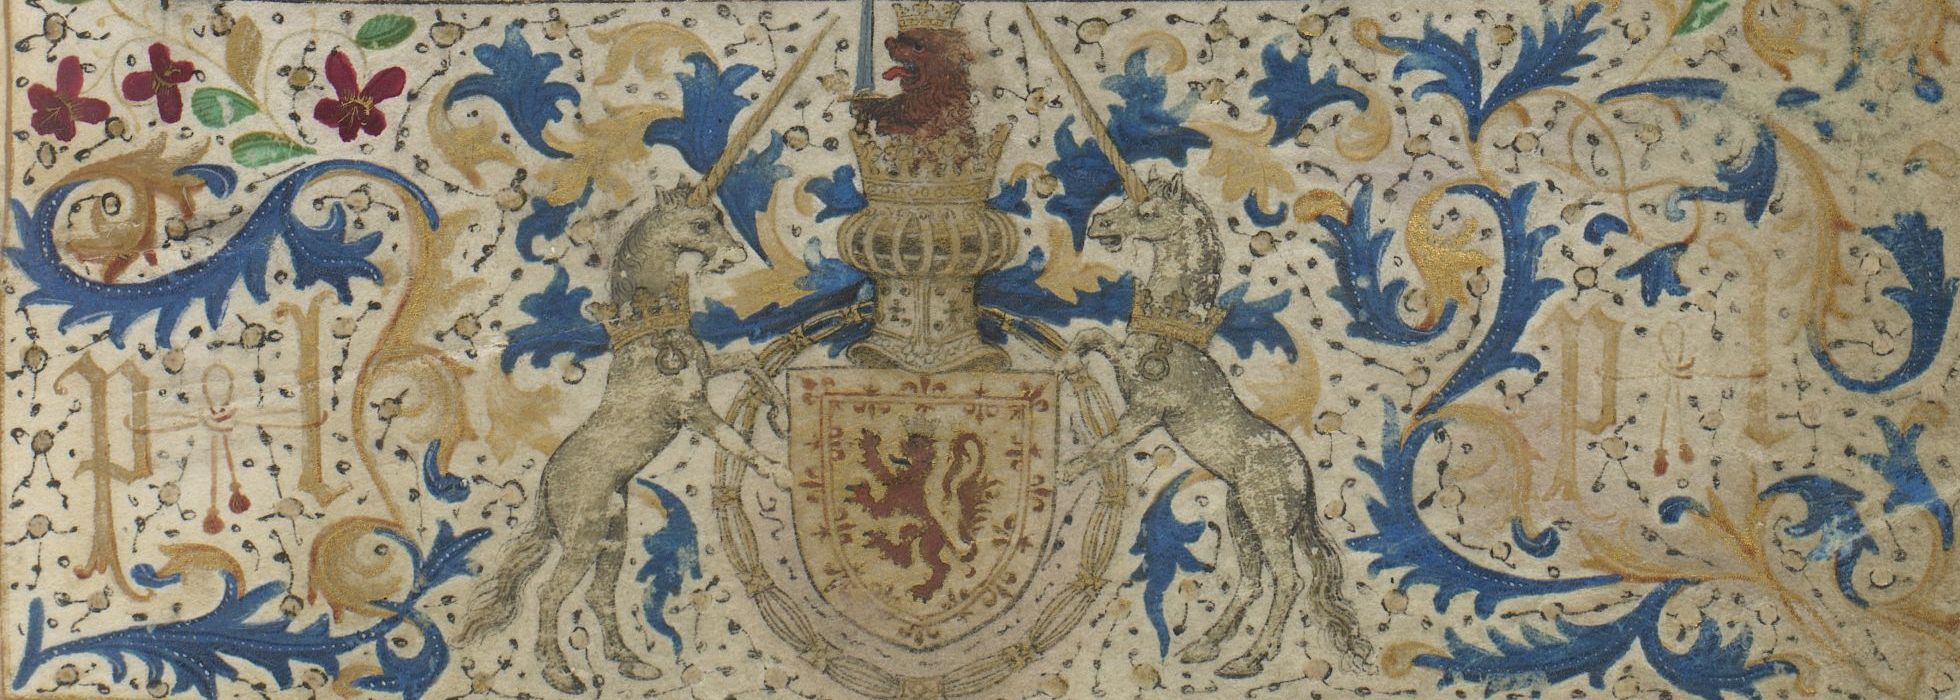 Crest with unicorns from EUL MS 195 fol.65